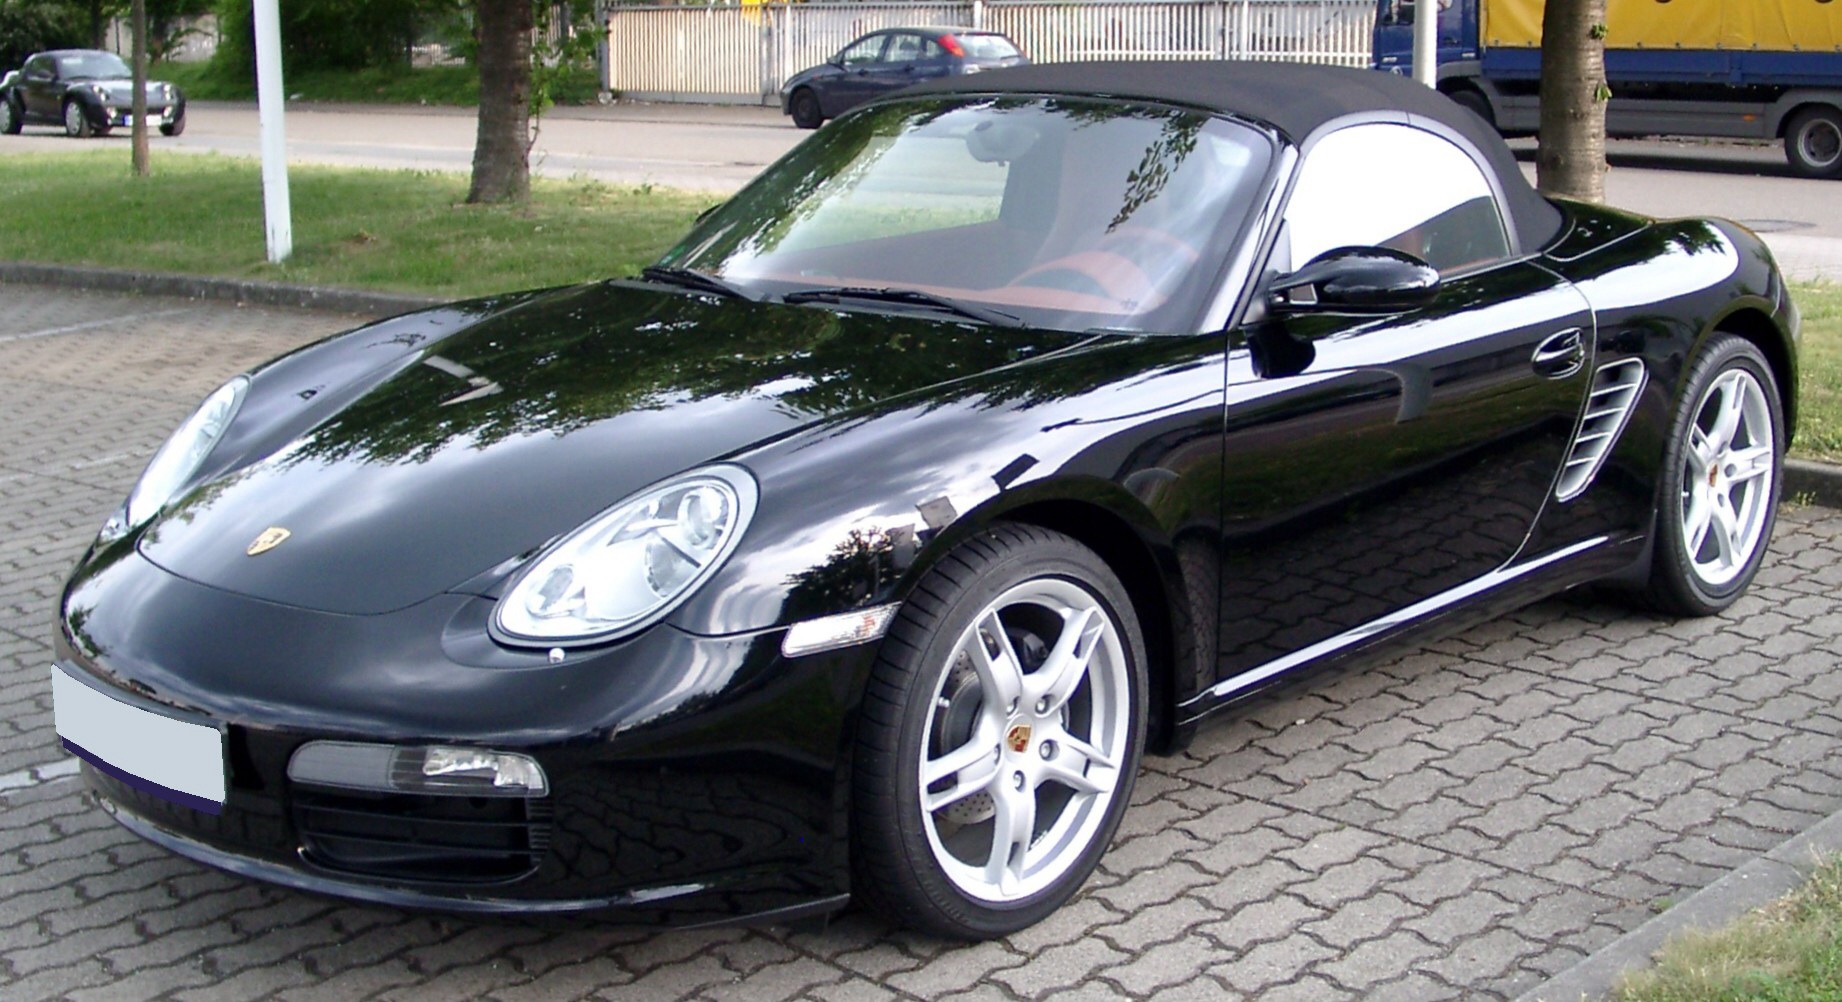 Tim Cook FAQ: His first sports car was a used Porsche Boxster.